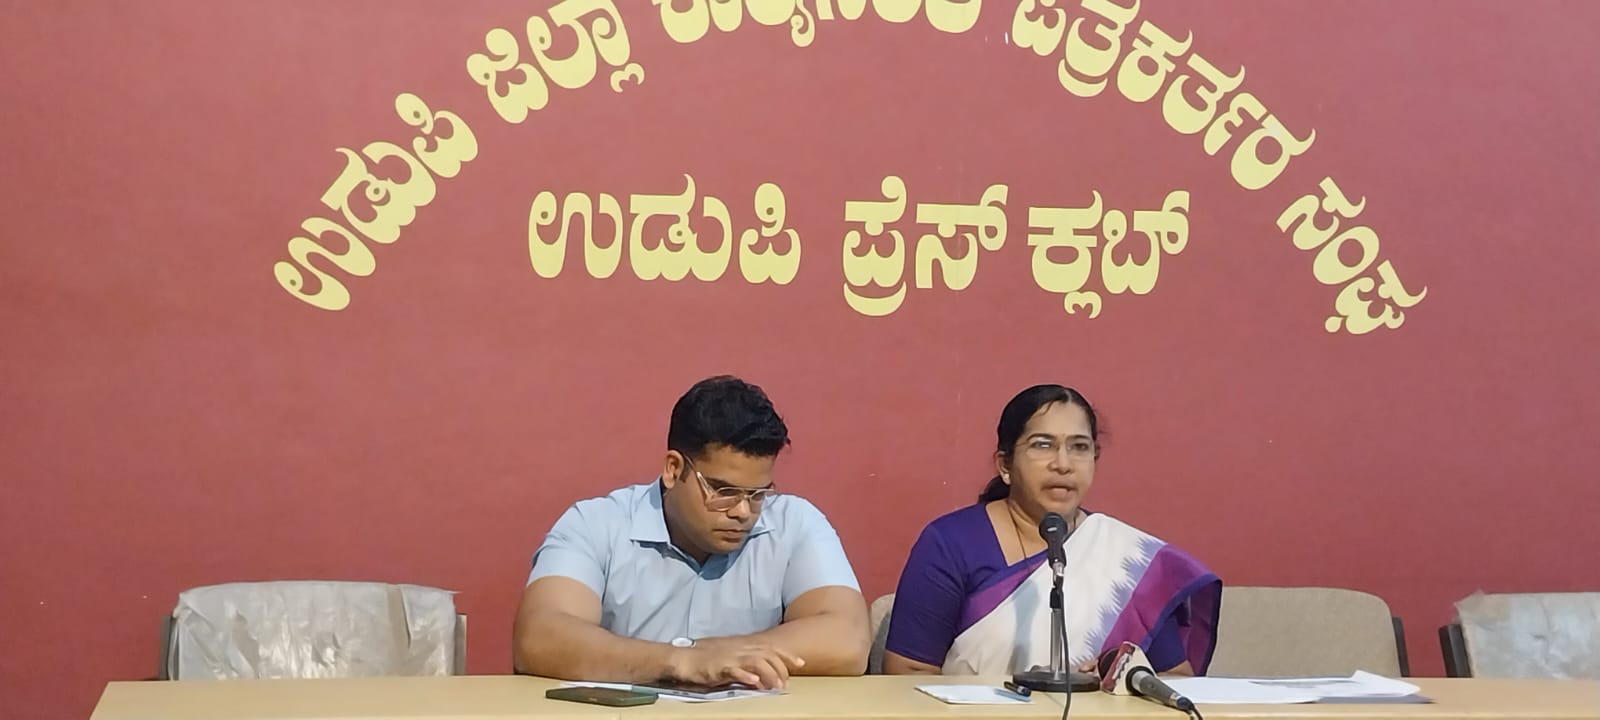 Necessary action for supply of drinking water in Udupi district - Dr. Vidya Kumari, DC in the Udupi media dialogue program